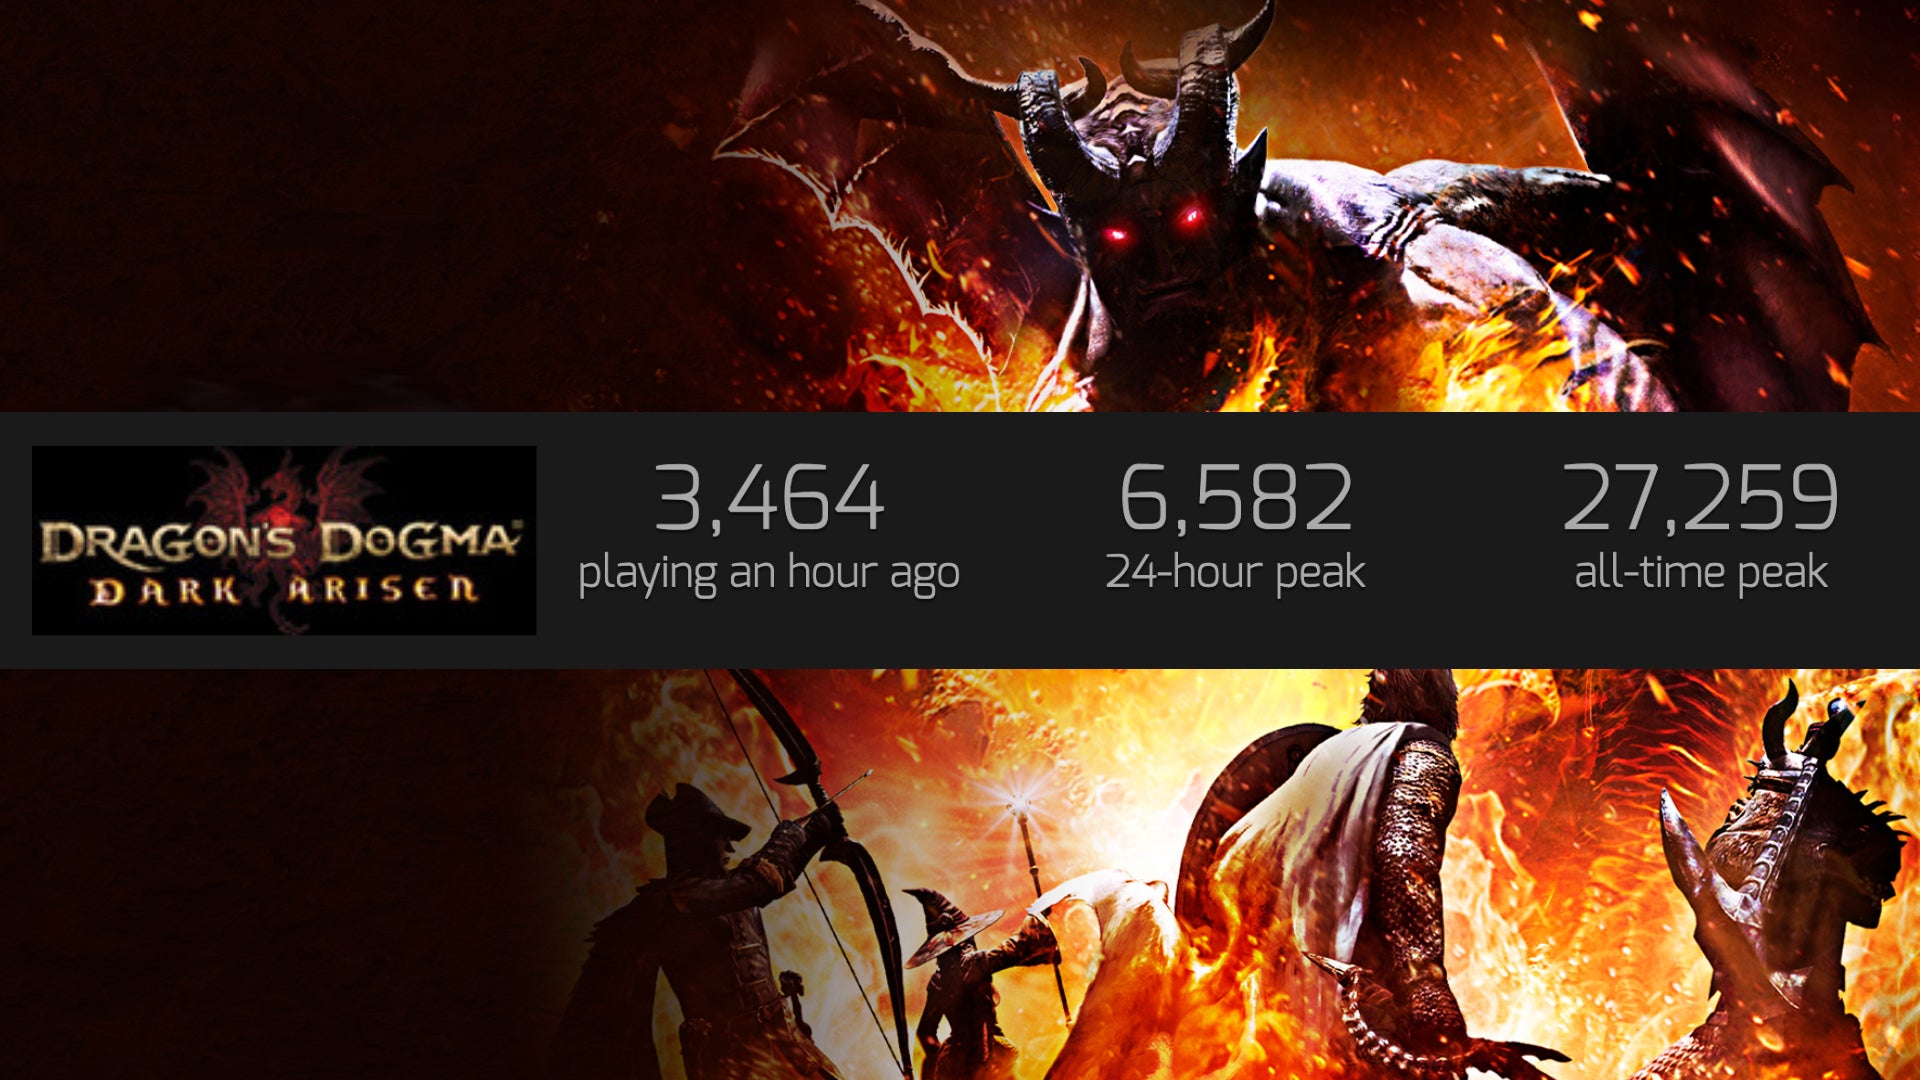 Image for Dragon’s Dogma 2 announcement gives Dragon’s Dogma its highest concurrent player count in 6 years